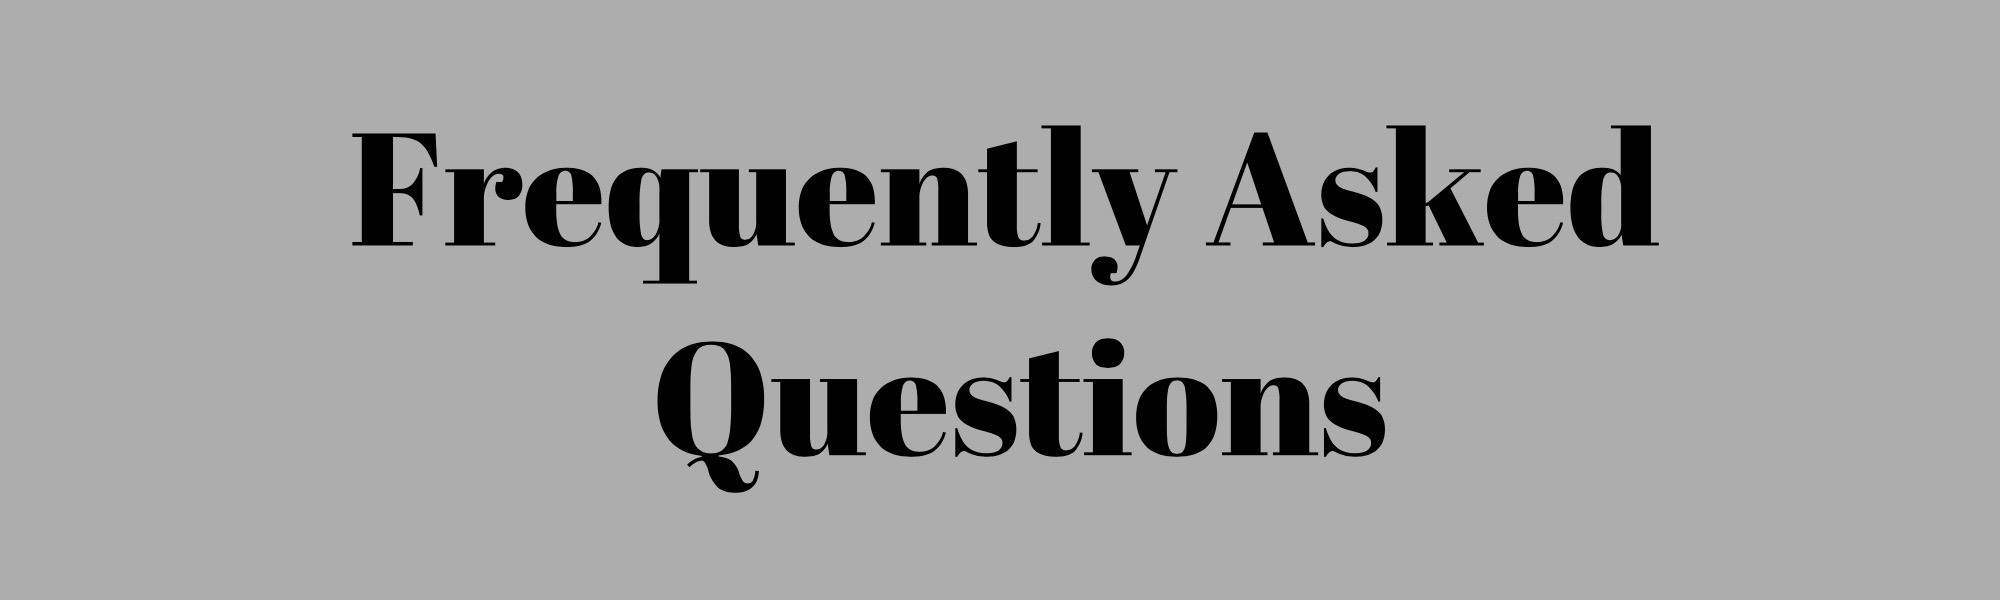 Notary Public Frequently Asked Questions